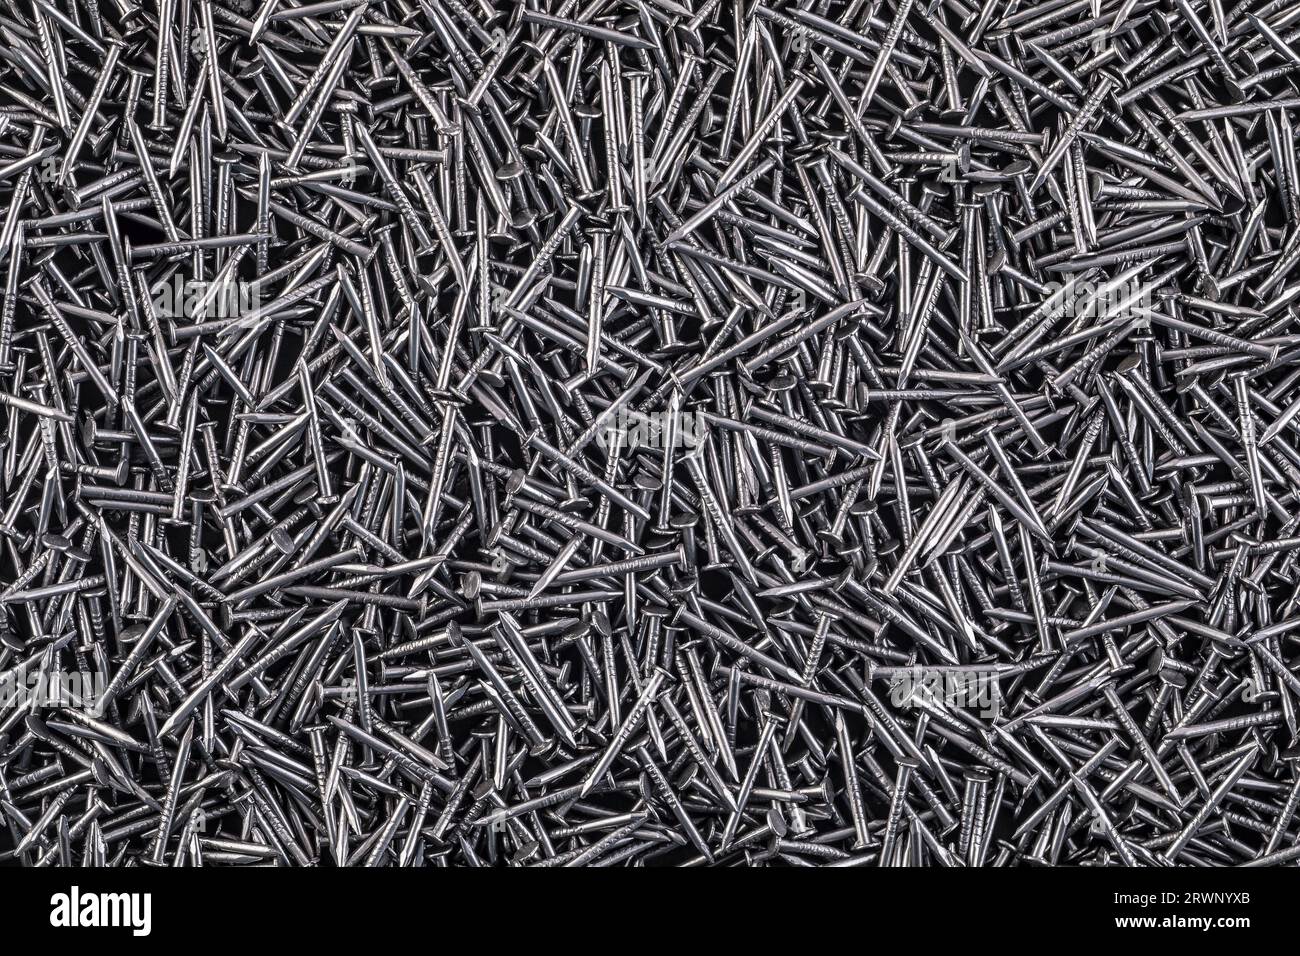 Lots of shiny metal nails background Stock Photo